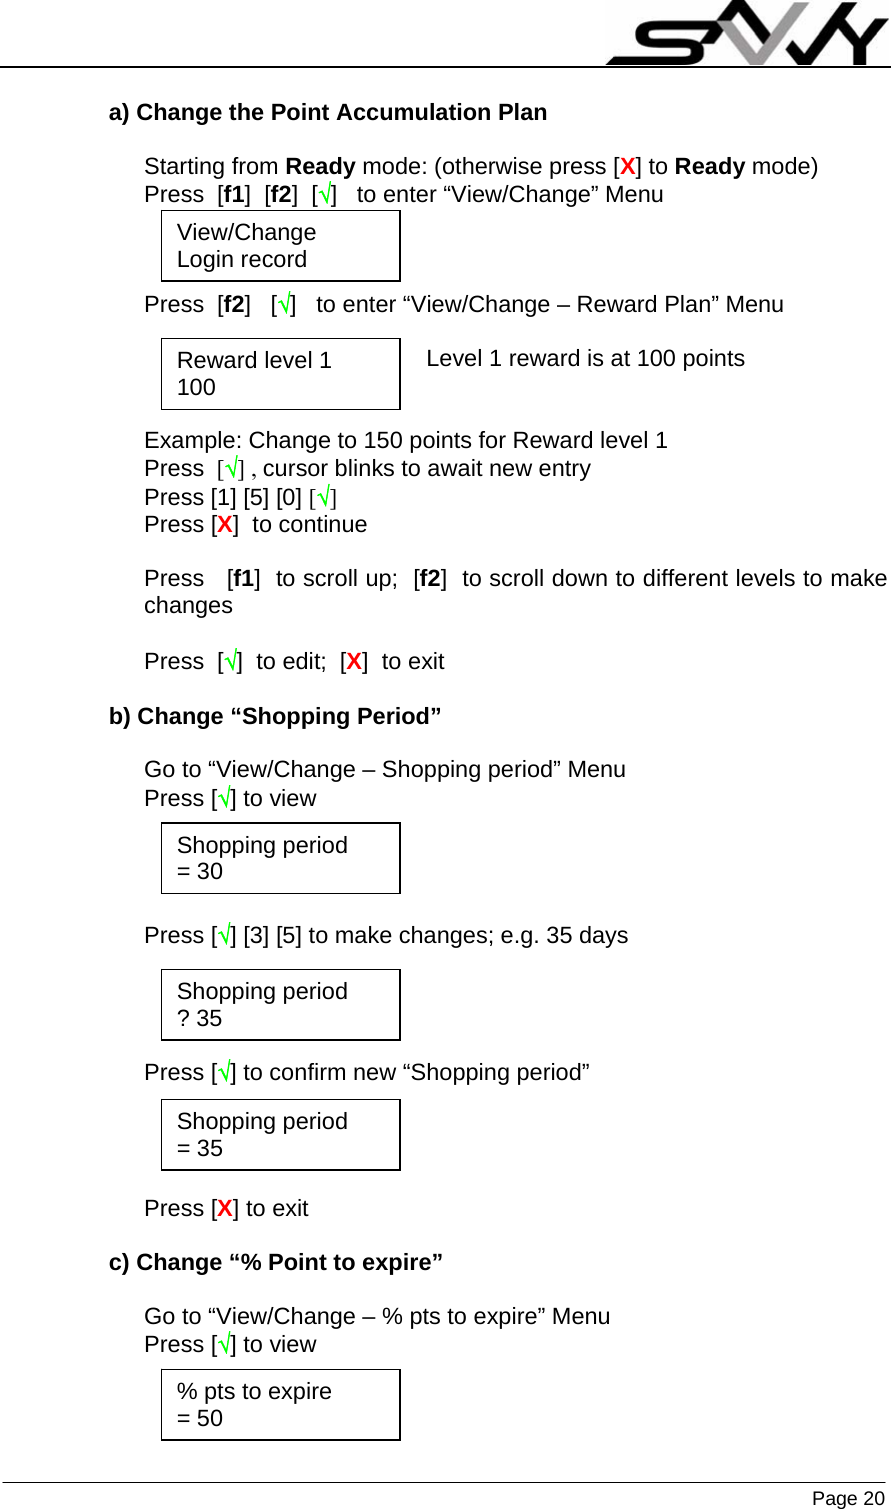                    Page 20   a) Change the Point Accumulation Plan  Starting from Ready mode: (otherwise press [X] to Ready mode) Press  [f1]  [f2]  [√]   to enter “View/Change” Menu          Press  [f2]   [√]   to enter “View/Change – Reward Plan” Menu  Level 1 reward is at 100 points   Example: Change to 150 points for Reward level 1  Press  [√] , cursor blinks to await new entry Press [1] [5] [0] [√] Press [X]  to continue  Press   [f1]  to scroll up;  [f2]  to scroll down to different levels to make changes  Press  [√]  to edit;  [X]  to exit  b) Change “Shopping Period”  Go to “View/Change – Shopping period” Menu Press [√] to view     Press [√] [3] [5] to make changes; e.g. 35 days     Press [√] to confirm new “Shopping period”     Press [X] to exit  c) Change “% Point to expire”  Go to “View/Change – % pts to expire” Menu Press [√] to view    View/Change Login record Reward level 1 100 Shopping period = 30 % pts to expire = 50 Shopping period ? 35 Shopping period = 35 